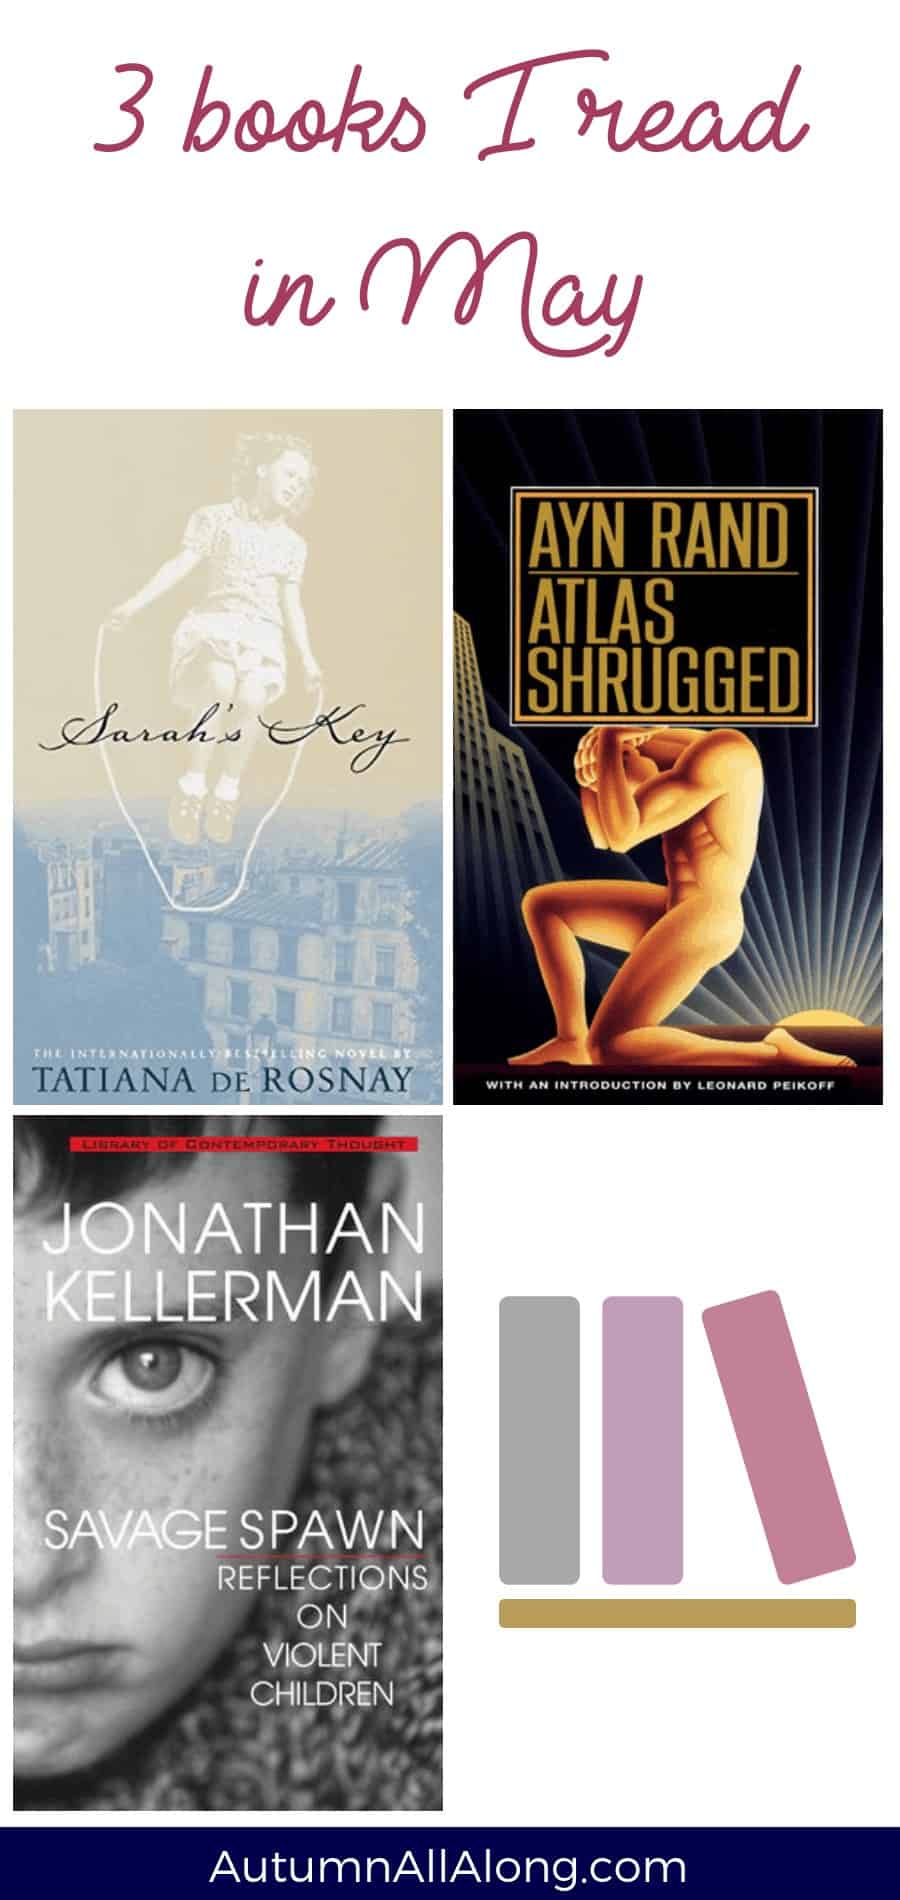 My books from May. Reviews on: Savage Spawn by Jonathan Kellerman, Atlas Shrugged by Ayn Rand, and Sarah's Key. | via Autumn All Along